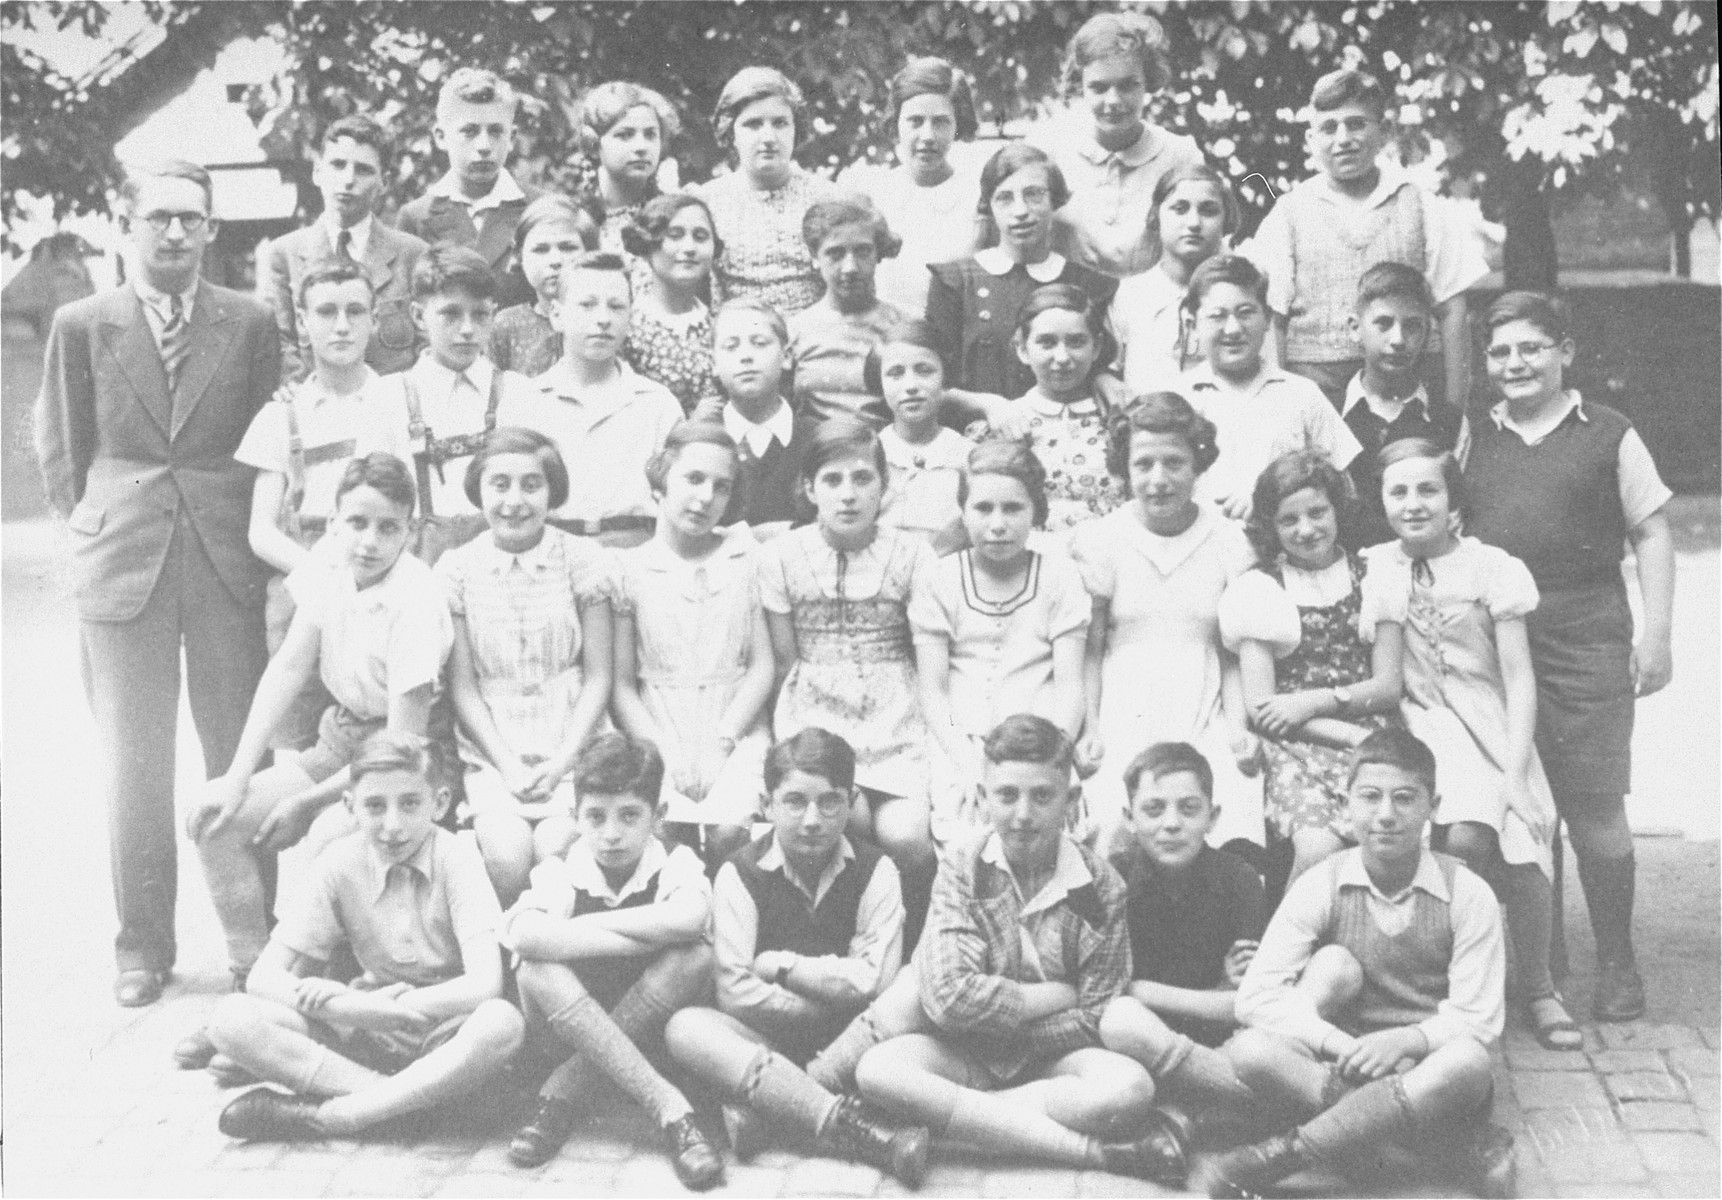 Group portrait of pupils in the seventh grade at a Jewish school in Karlsruhe, Germany that had been relocated to one floor at the 'Holzbodengymnasium' a special school for mentally disabled children. 

Among those pictured is the teacher, Max Ottensoser.  Also pictured is Suse Heidenheimer (later Steinhardt), 
second row from the front and the fourth girl from the right.  Louis (Ludwig) Maier is pictured in the top row, second from the left.  Julius Hirschberger is on the borttom row, far right and Walter Baer is in the third row, third from the left.